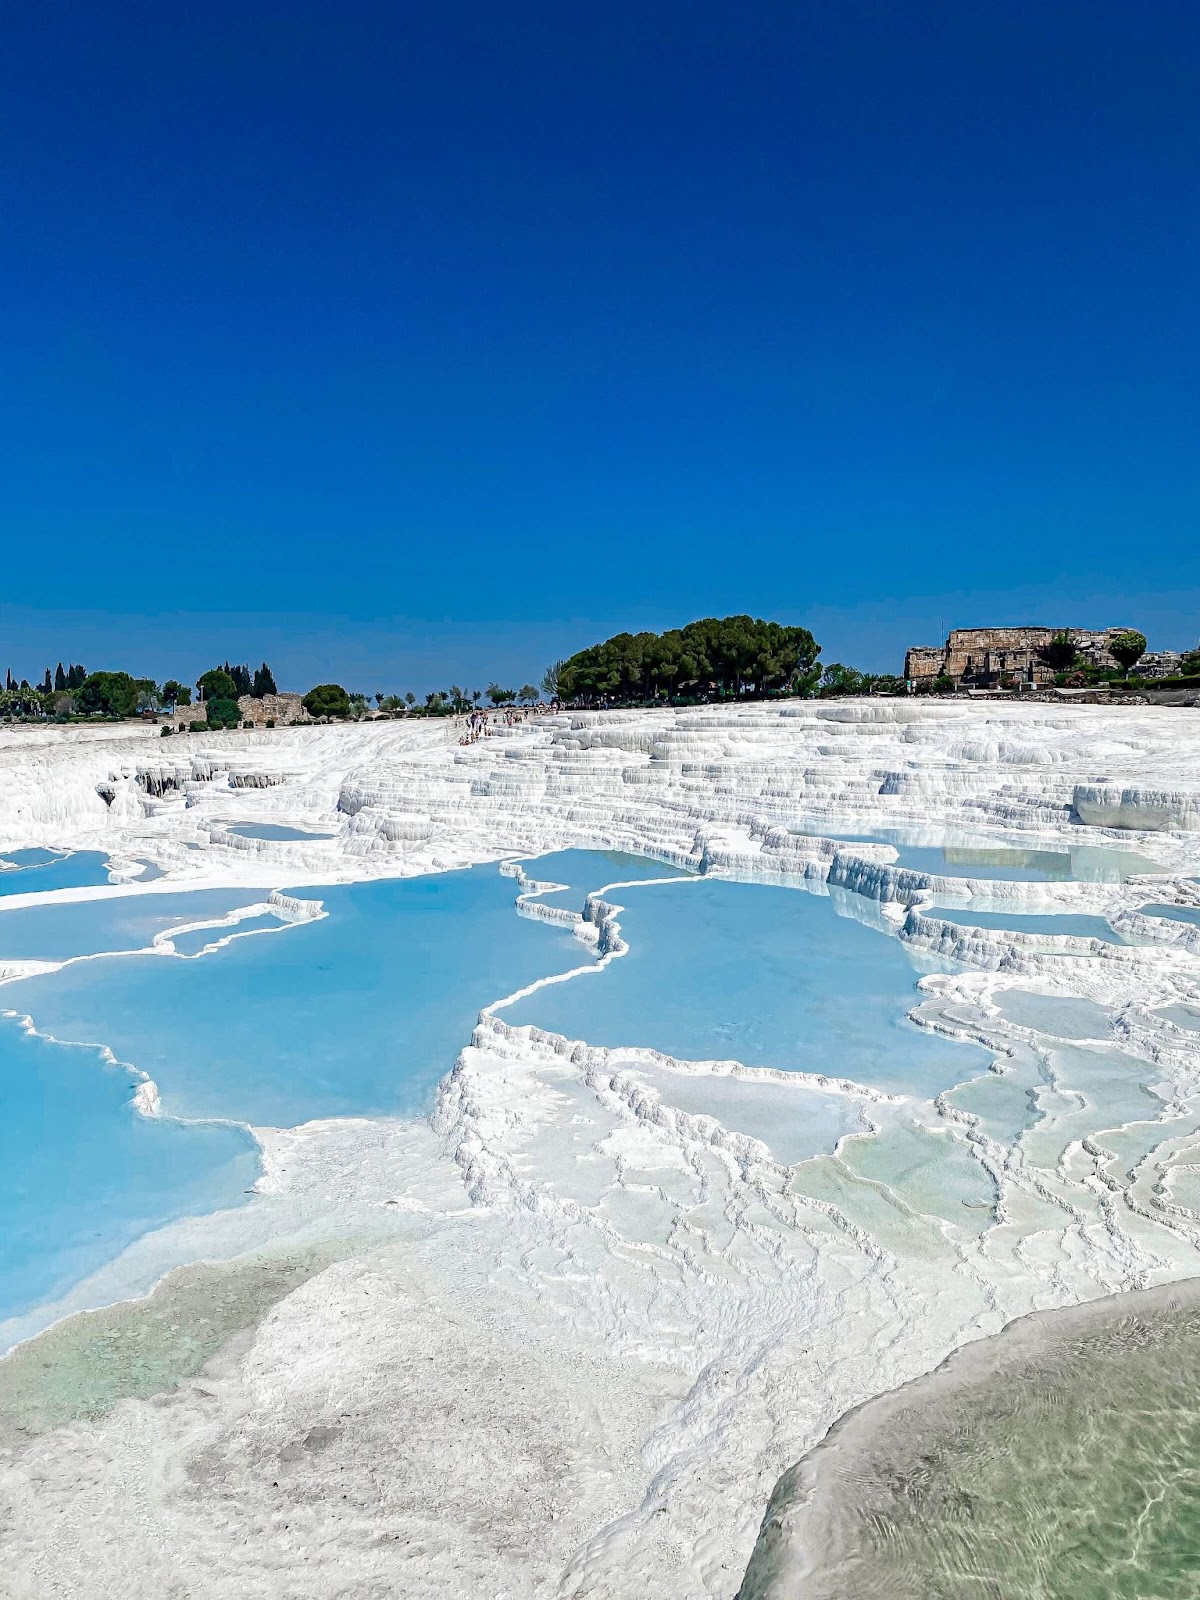 famous landmarks in Turkey, thermal pools of Pamukkale, cotton castle